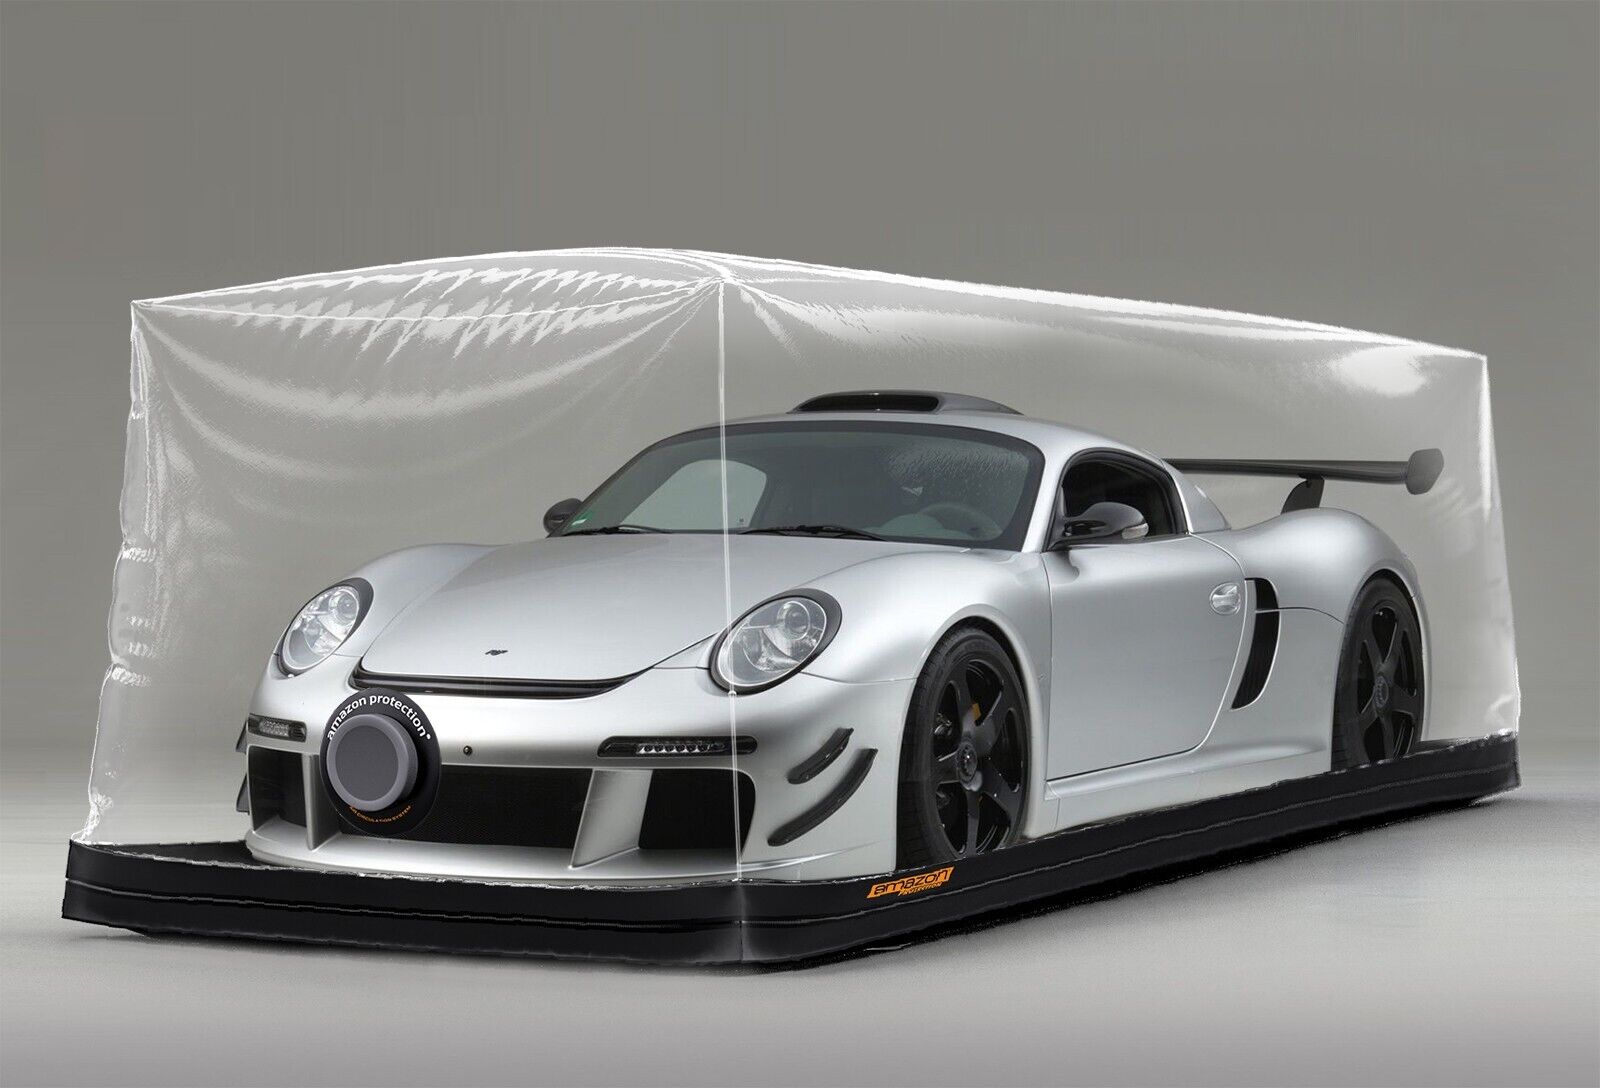 Amazon Protection Car Cover RUF CTR 3 Club Sport Capsule Car Bubble Cover